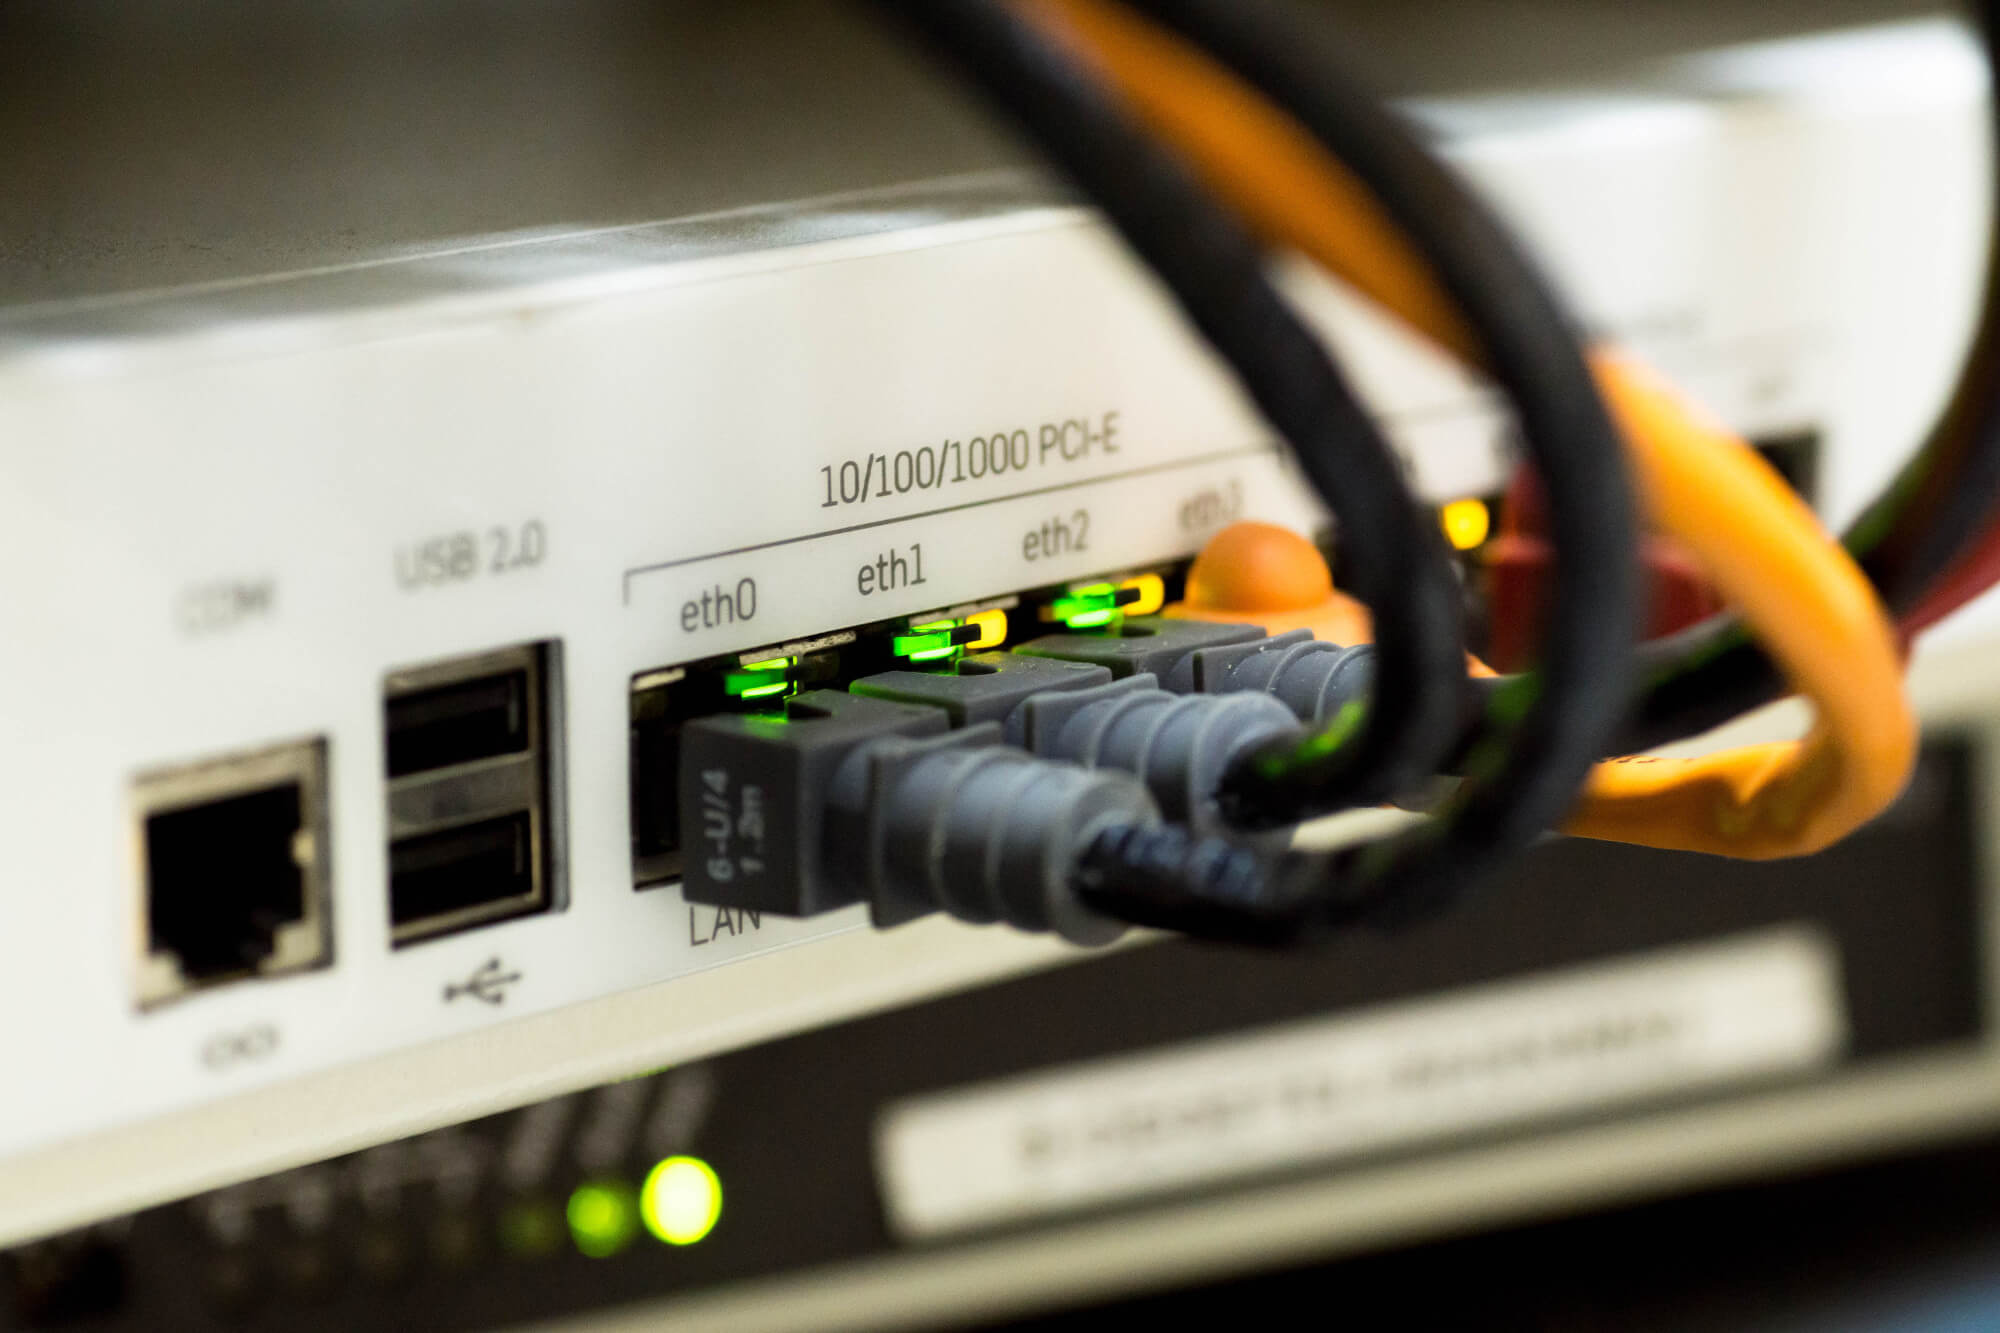 Close up view of network Ethernet cables plugged into ports on a switch/router